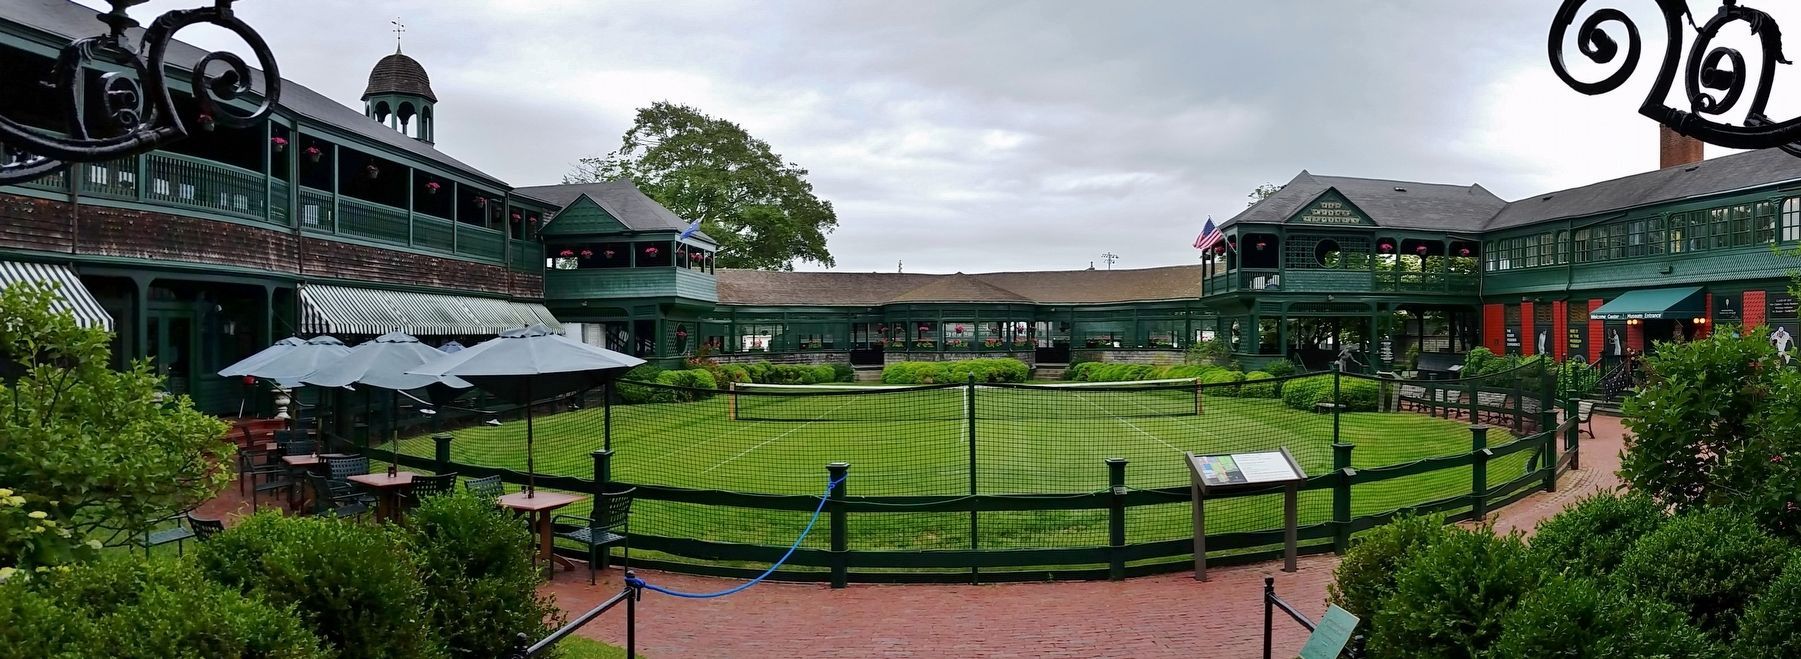 Newport Casino (<i>main courtyard & tennis court; wide view</i>) image. Click for full size.